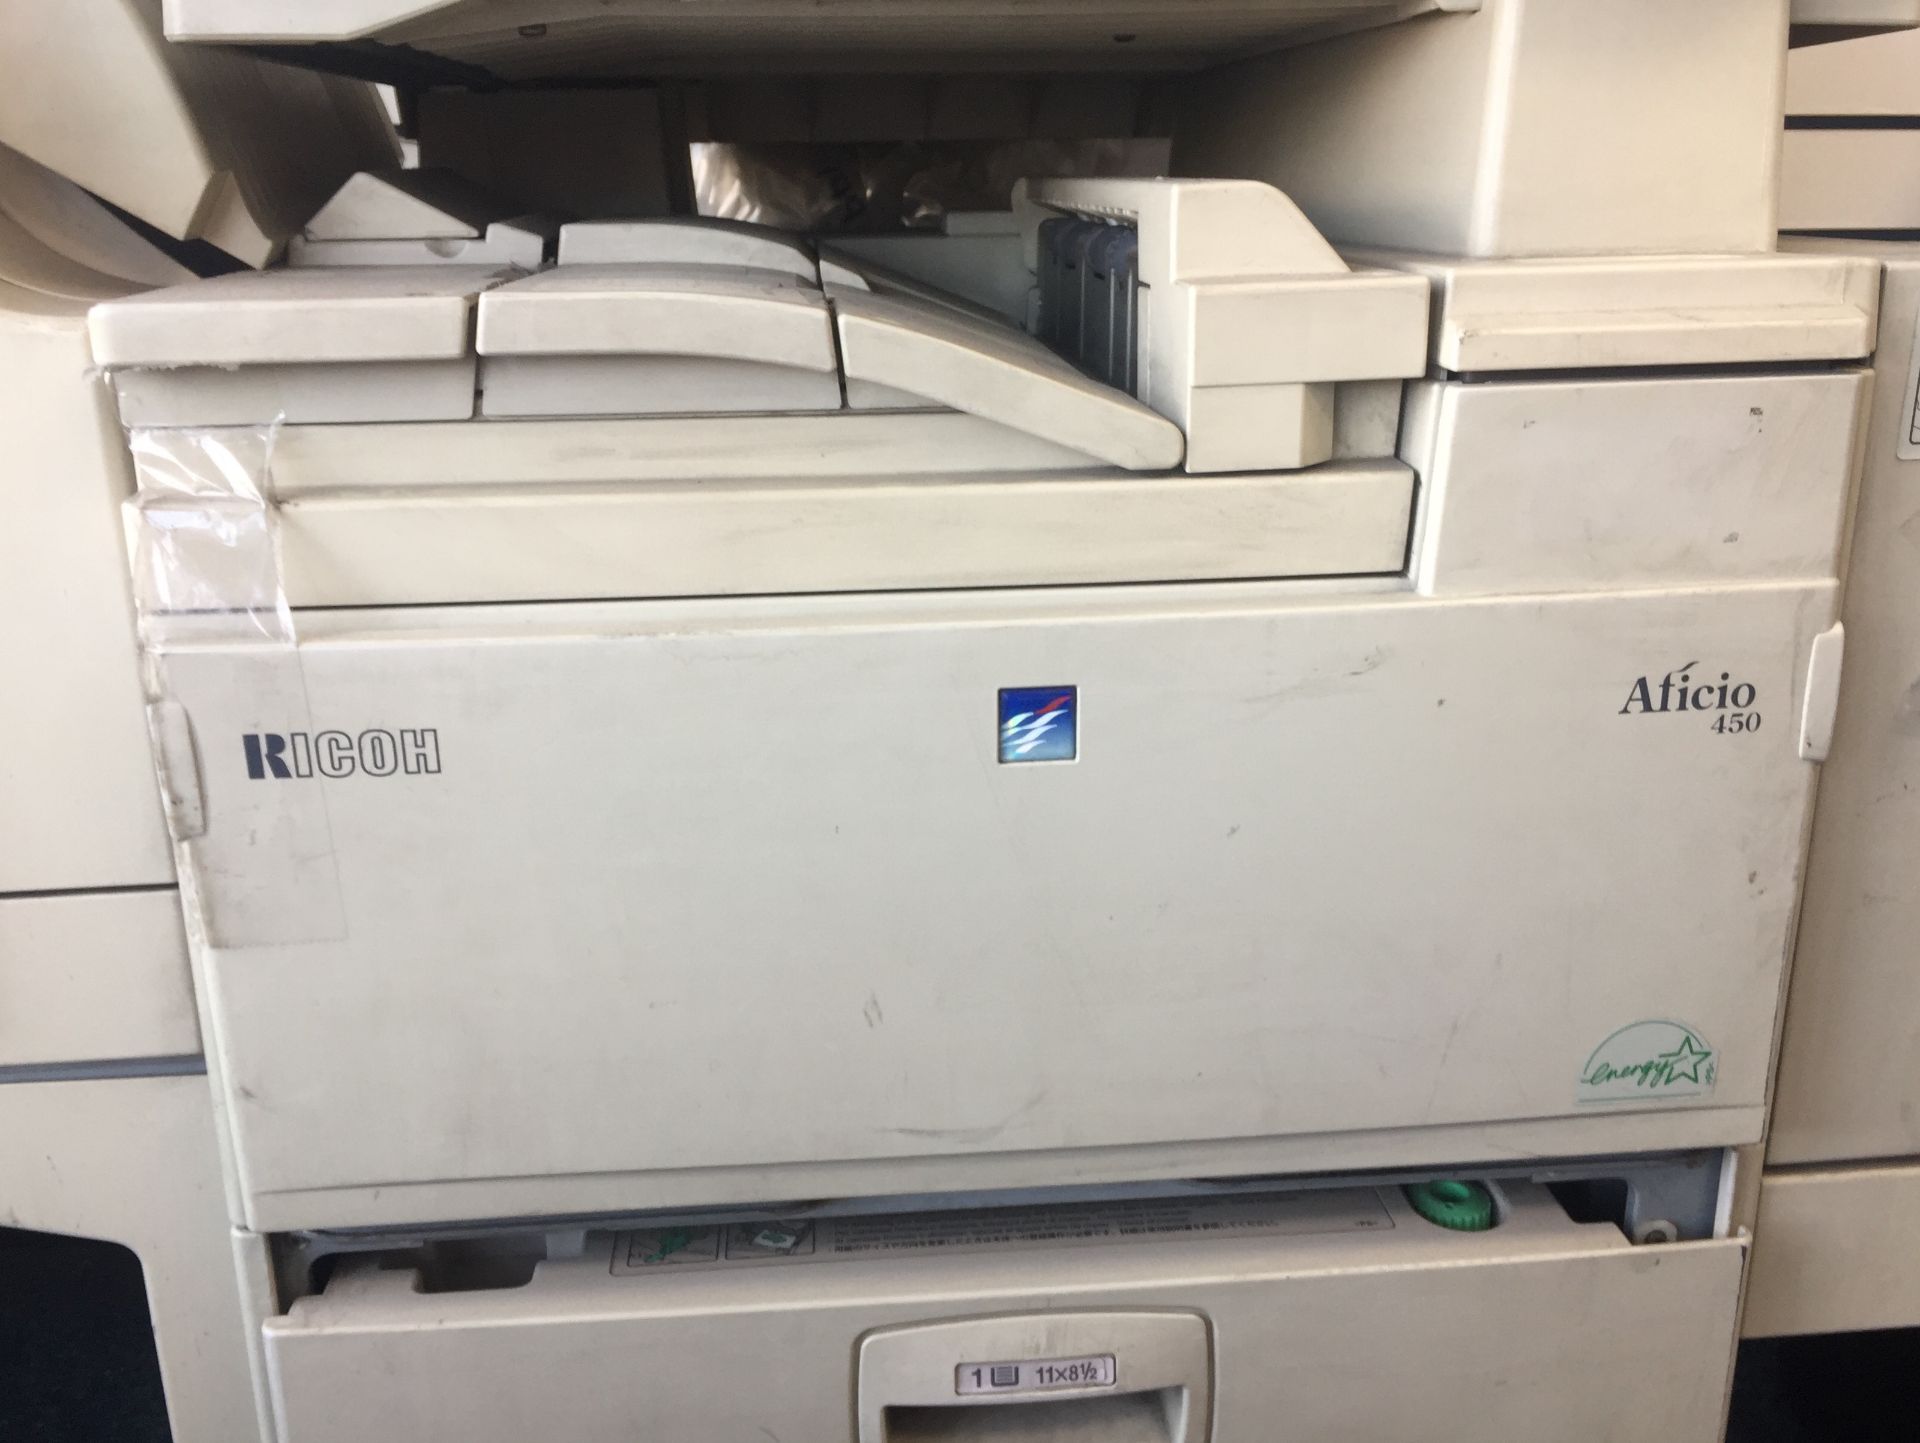 LARGE COMMERICAL PRINTER/PHOTOCOPIER FROM CLOSED UPS STORE - Image 2 of 5